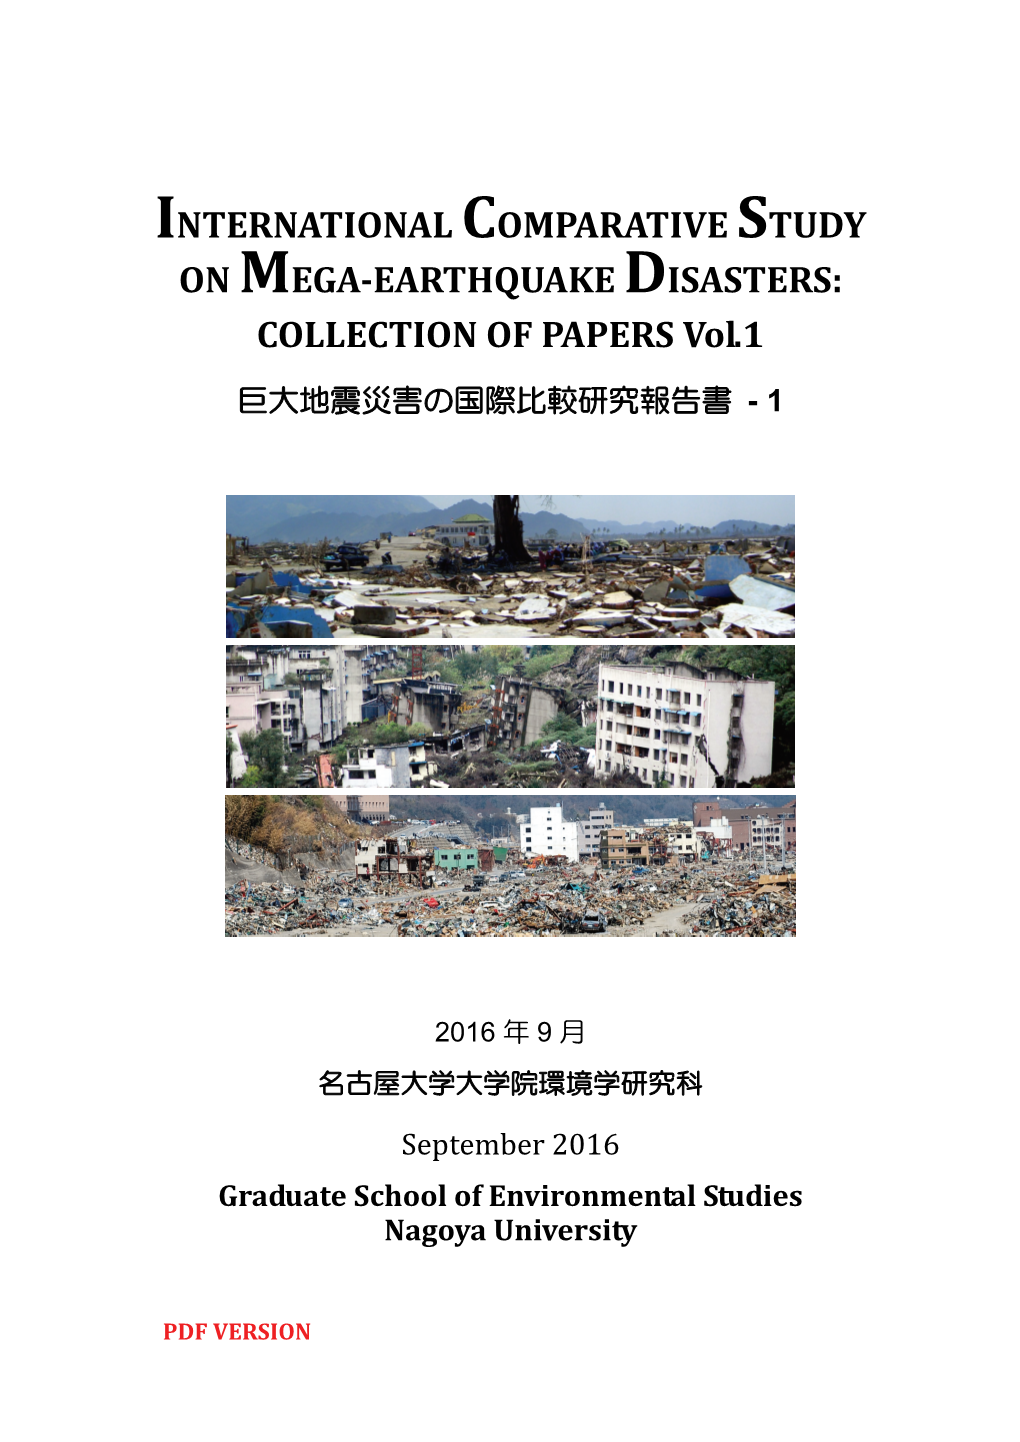 International Comparative Study on Mega-Earthquake Disasters: an Introduction